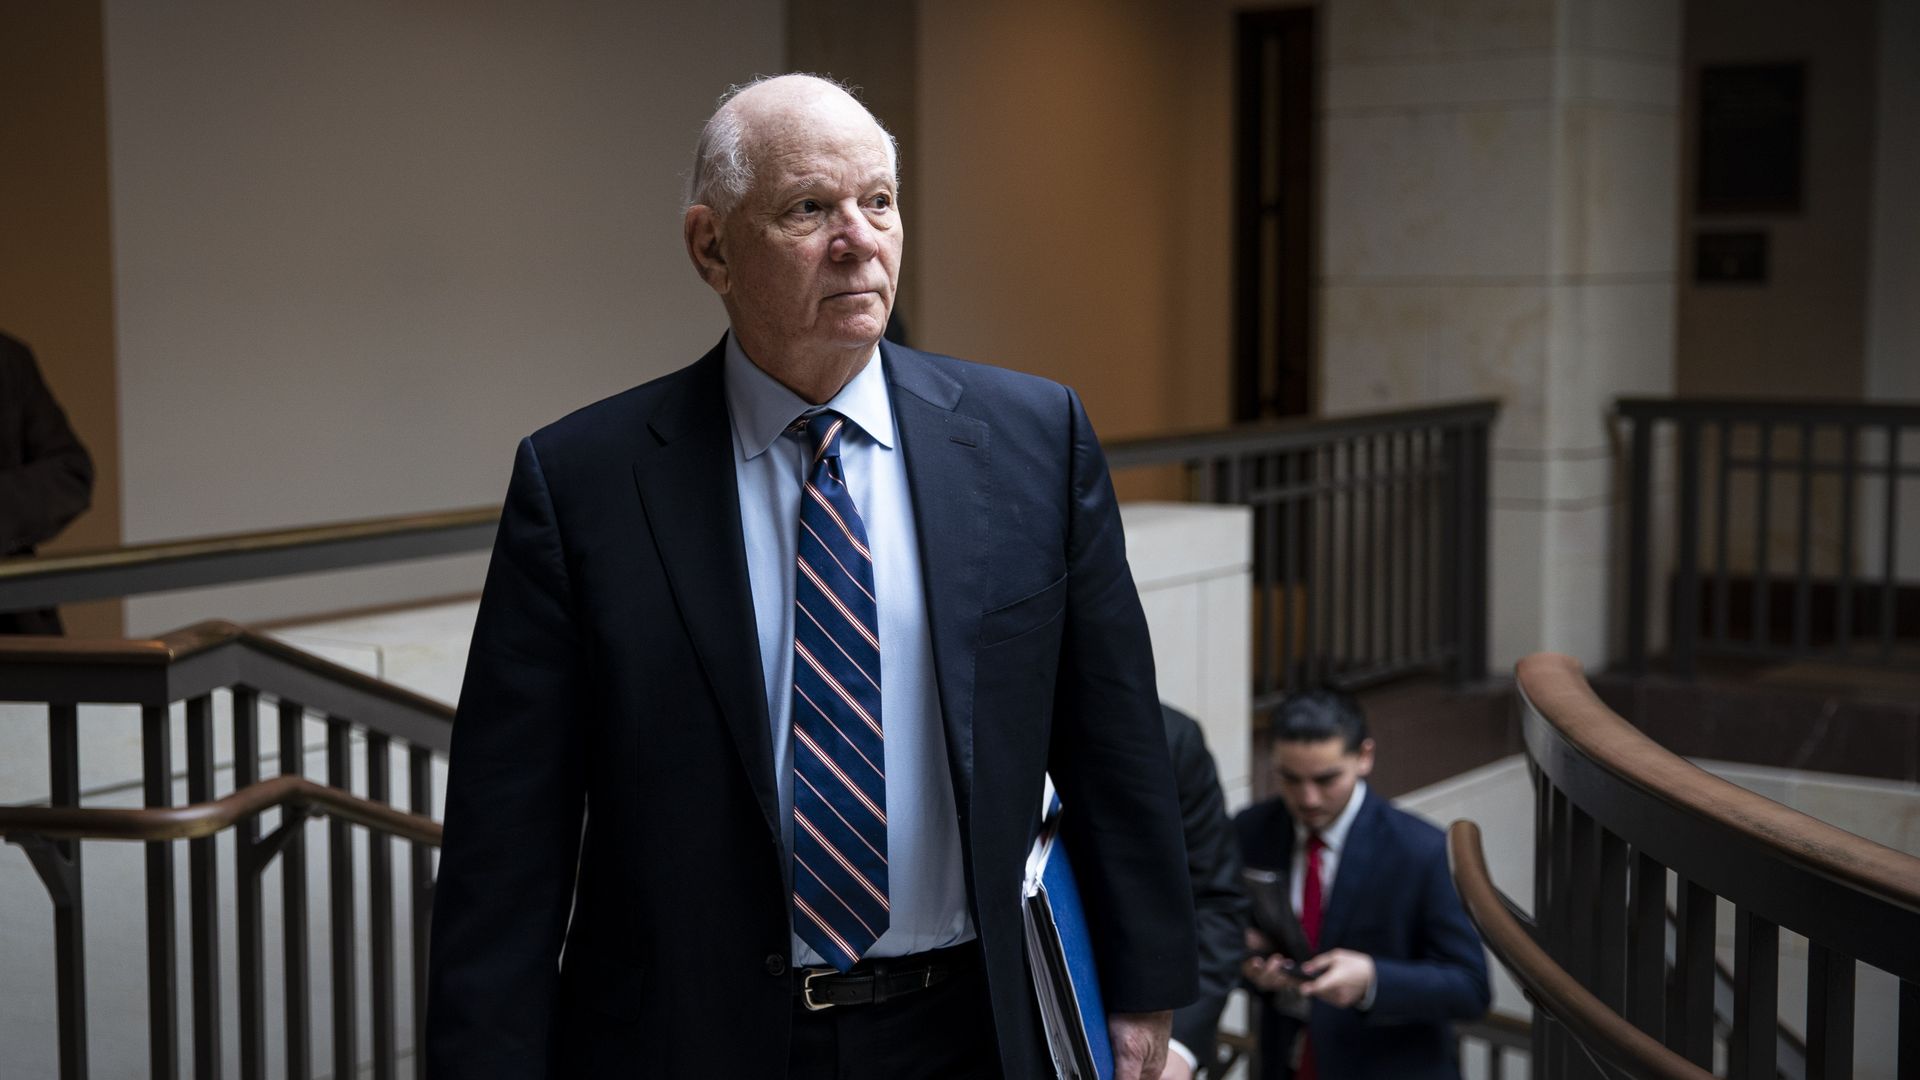 Sen. Ben Cardin, wearing a blue suit, light blue shirt and blue-and-yellow striped tie, walks up the stairs from the Senate SCIF.